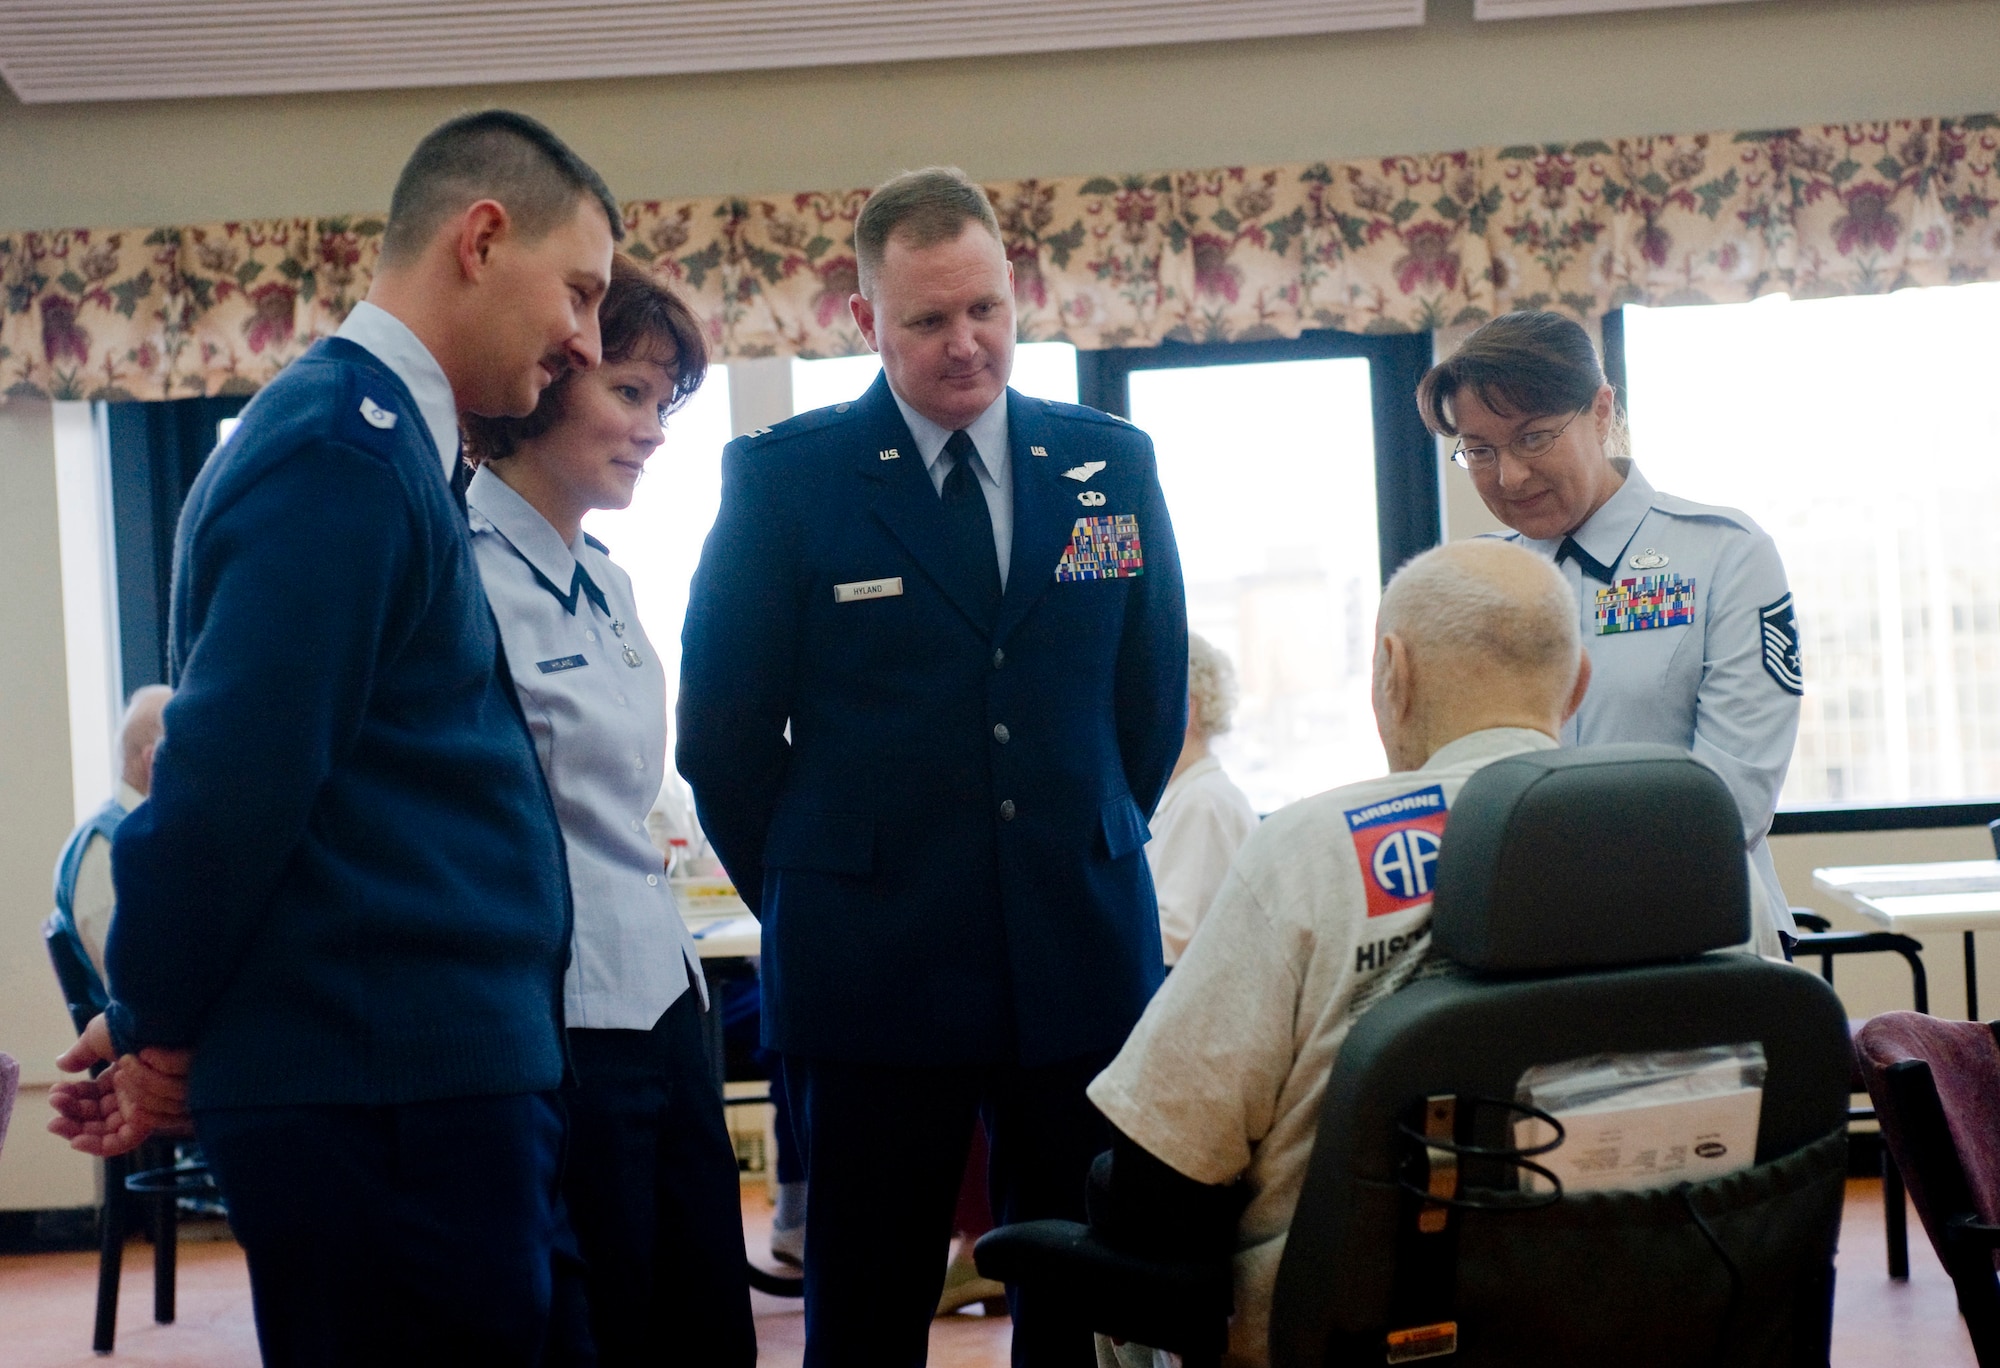 ANCHORAGE, Alaska -- Airmen from Elmendorf Air Force Base listens to a veteran at Anchorage Pioneer Home Nov. 7. Arctic Warriors spent some time with veterans to socialize and eat ice cream. (U.S. Air Force photo/Senior Airman Jonathan Steffen)